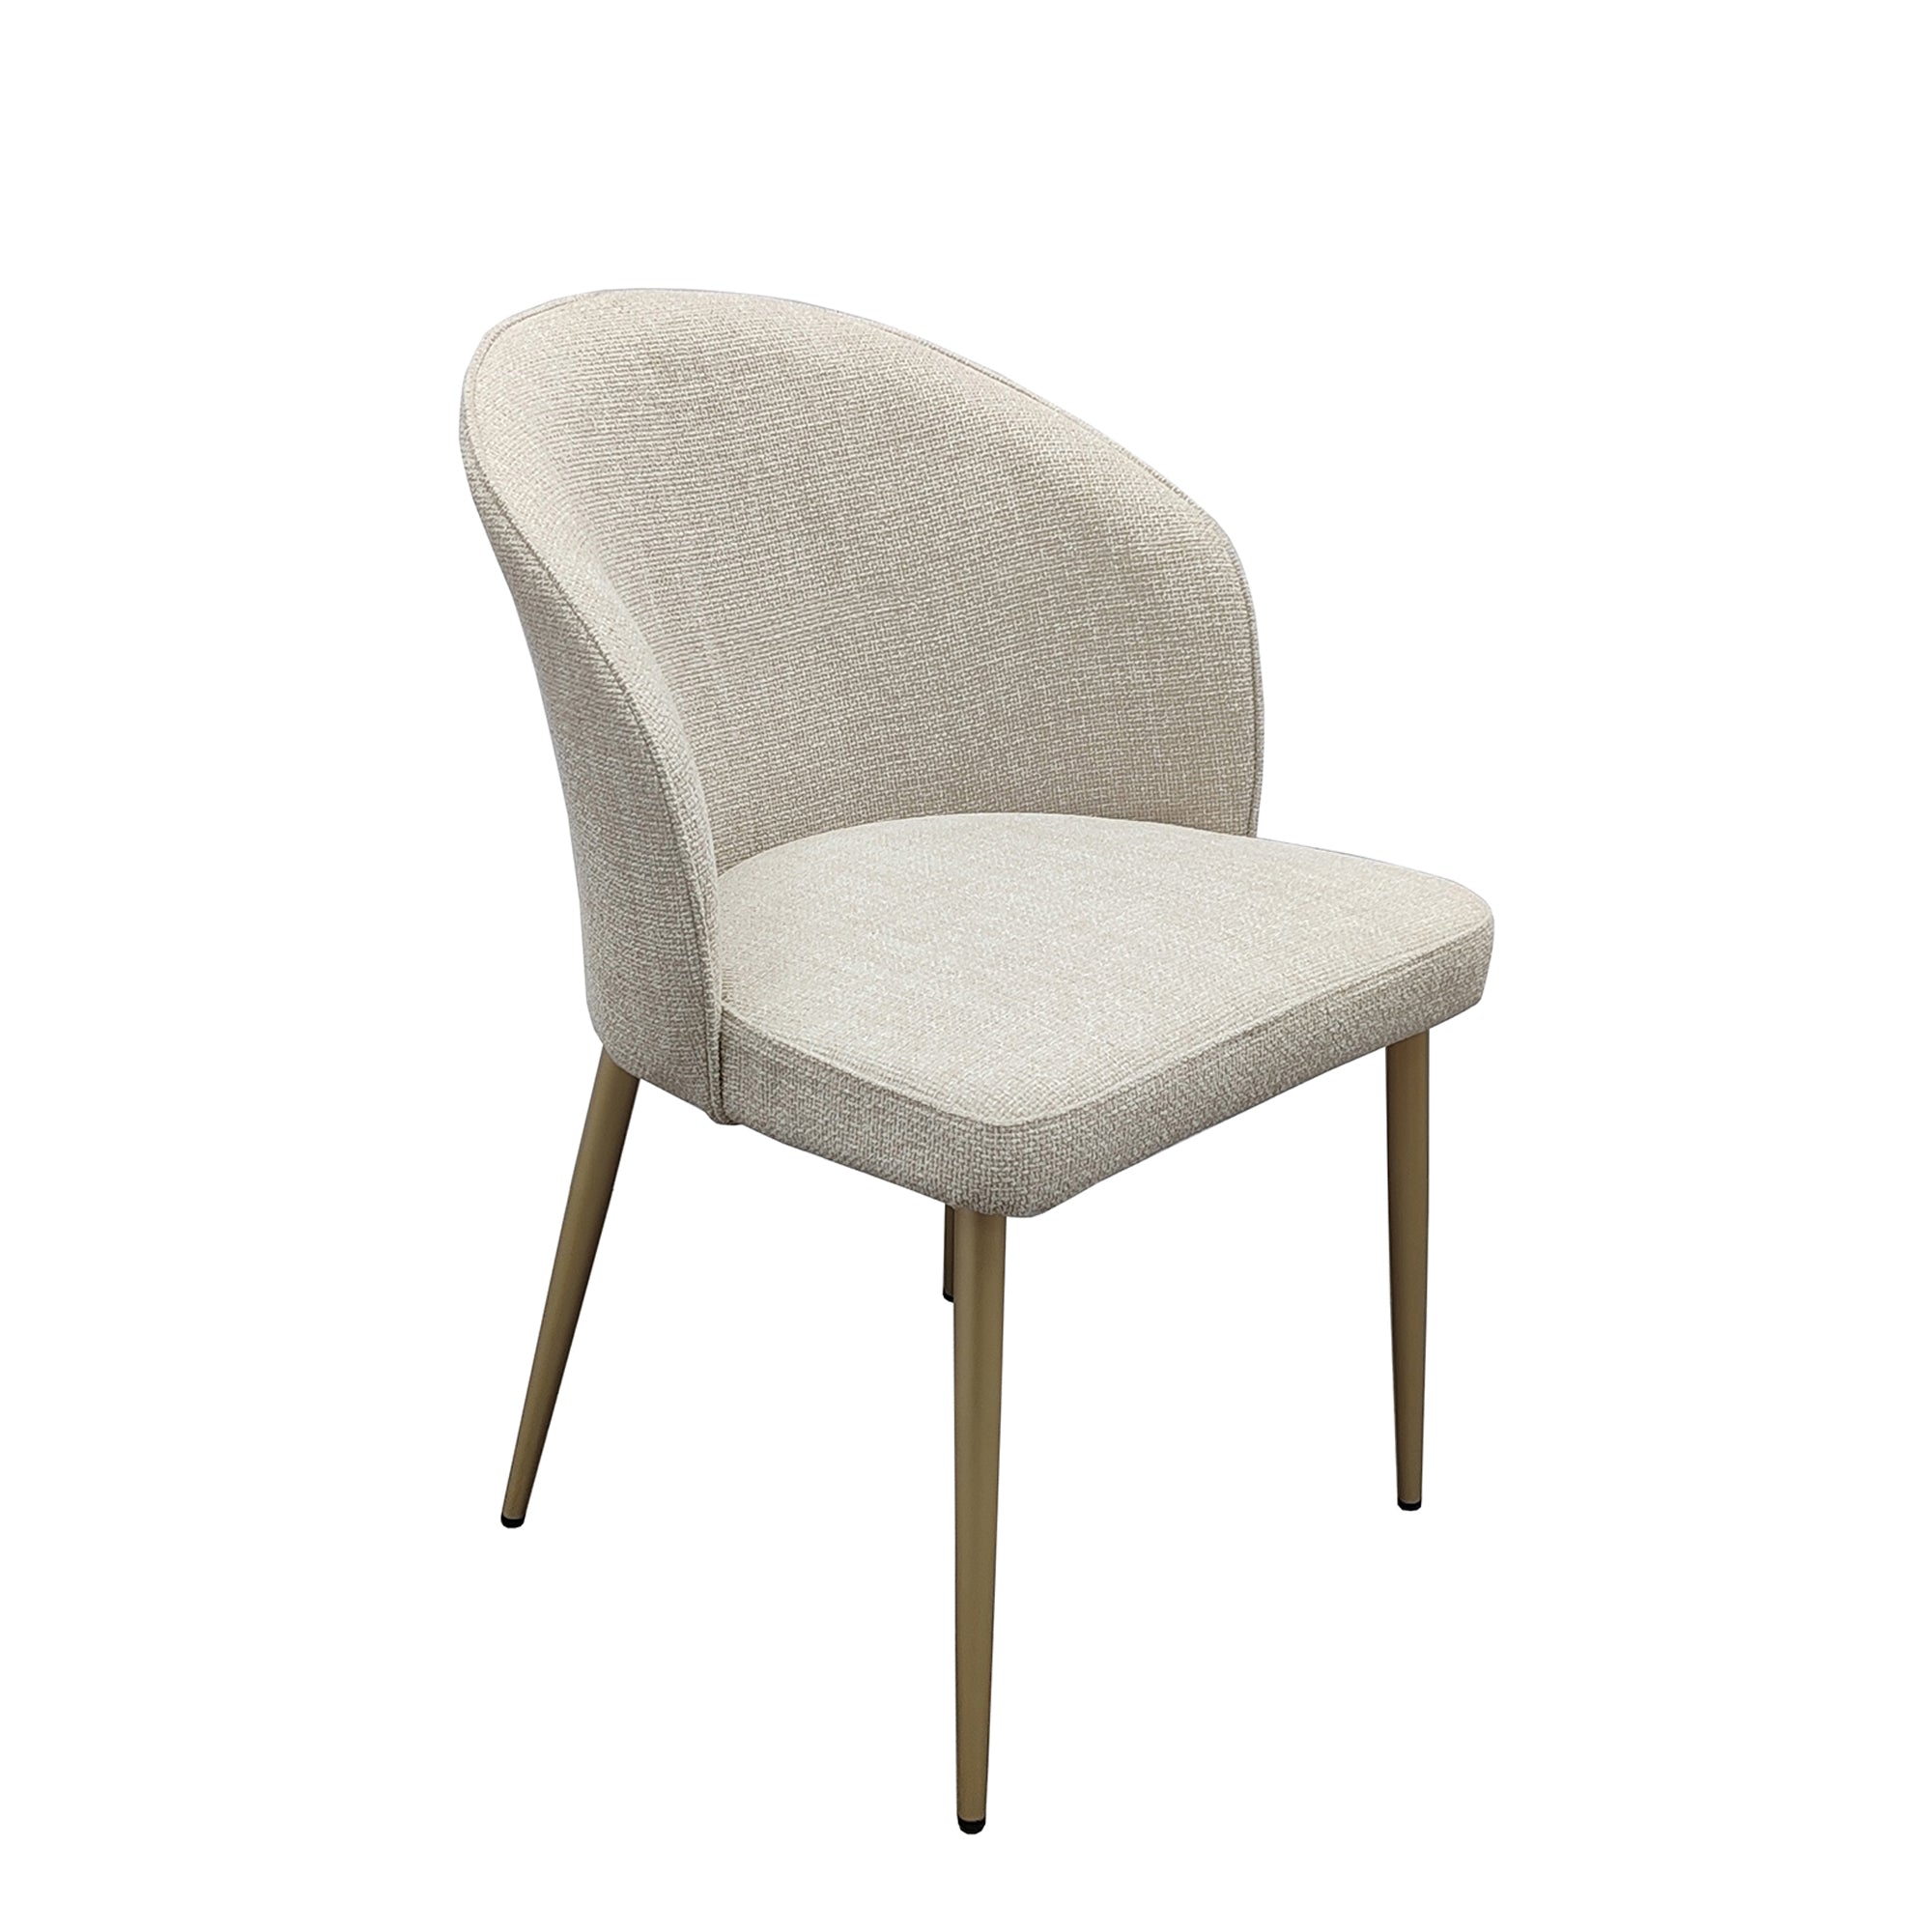 Majestic - Dining Chair In Beige Fabric